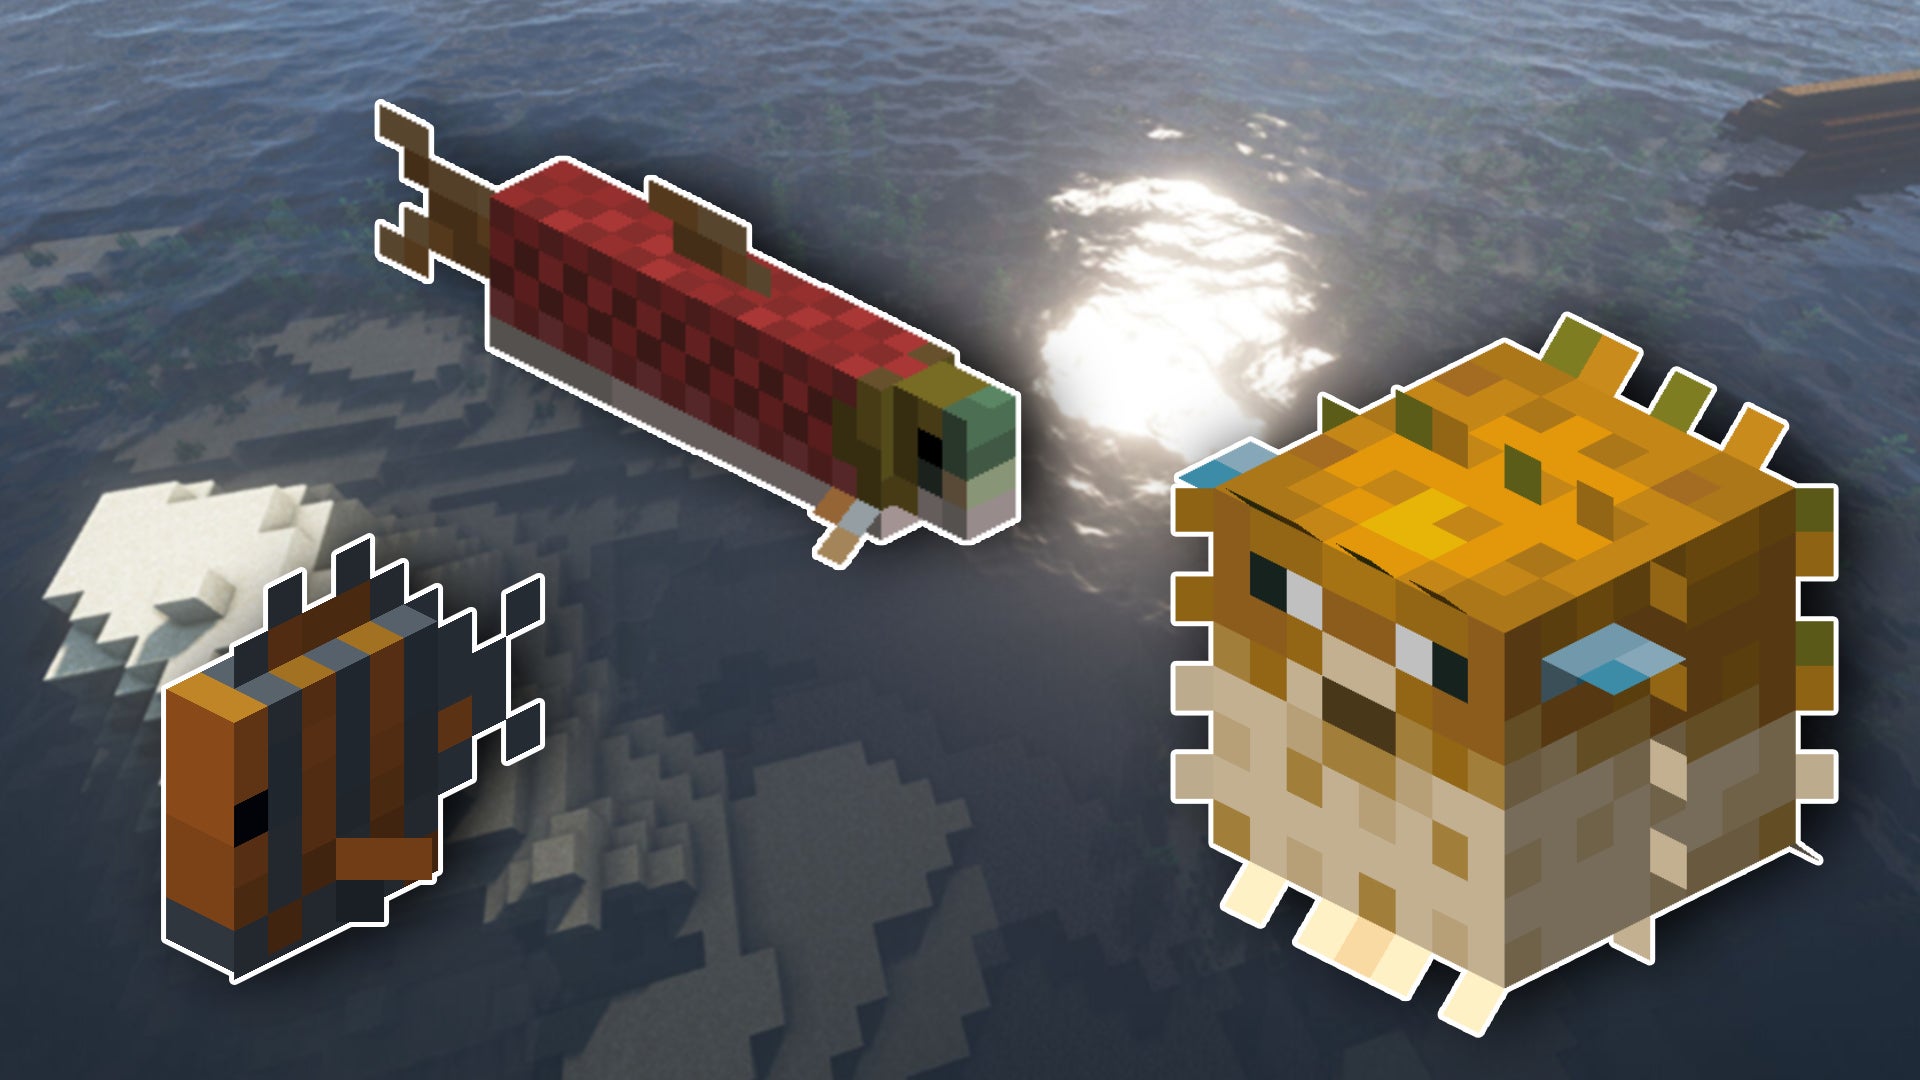 A selection of different Minecraft fish superimposed over a screenshot of the sea.